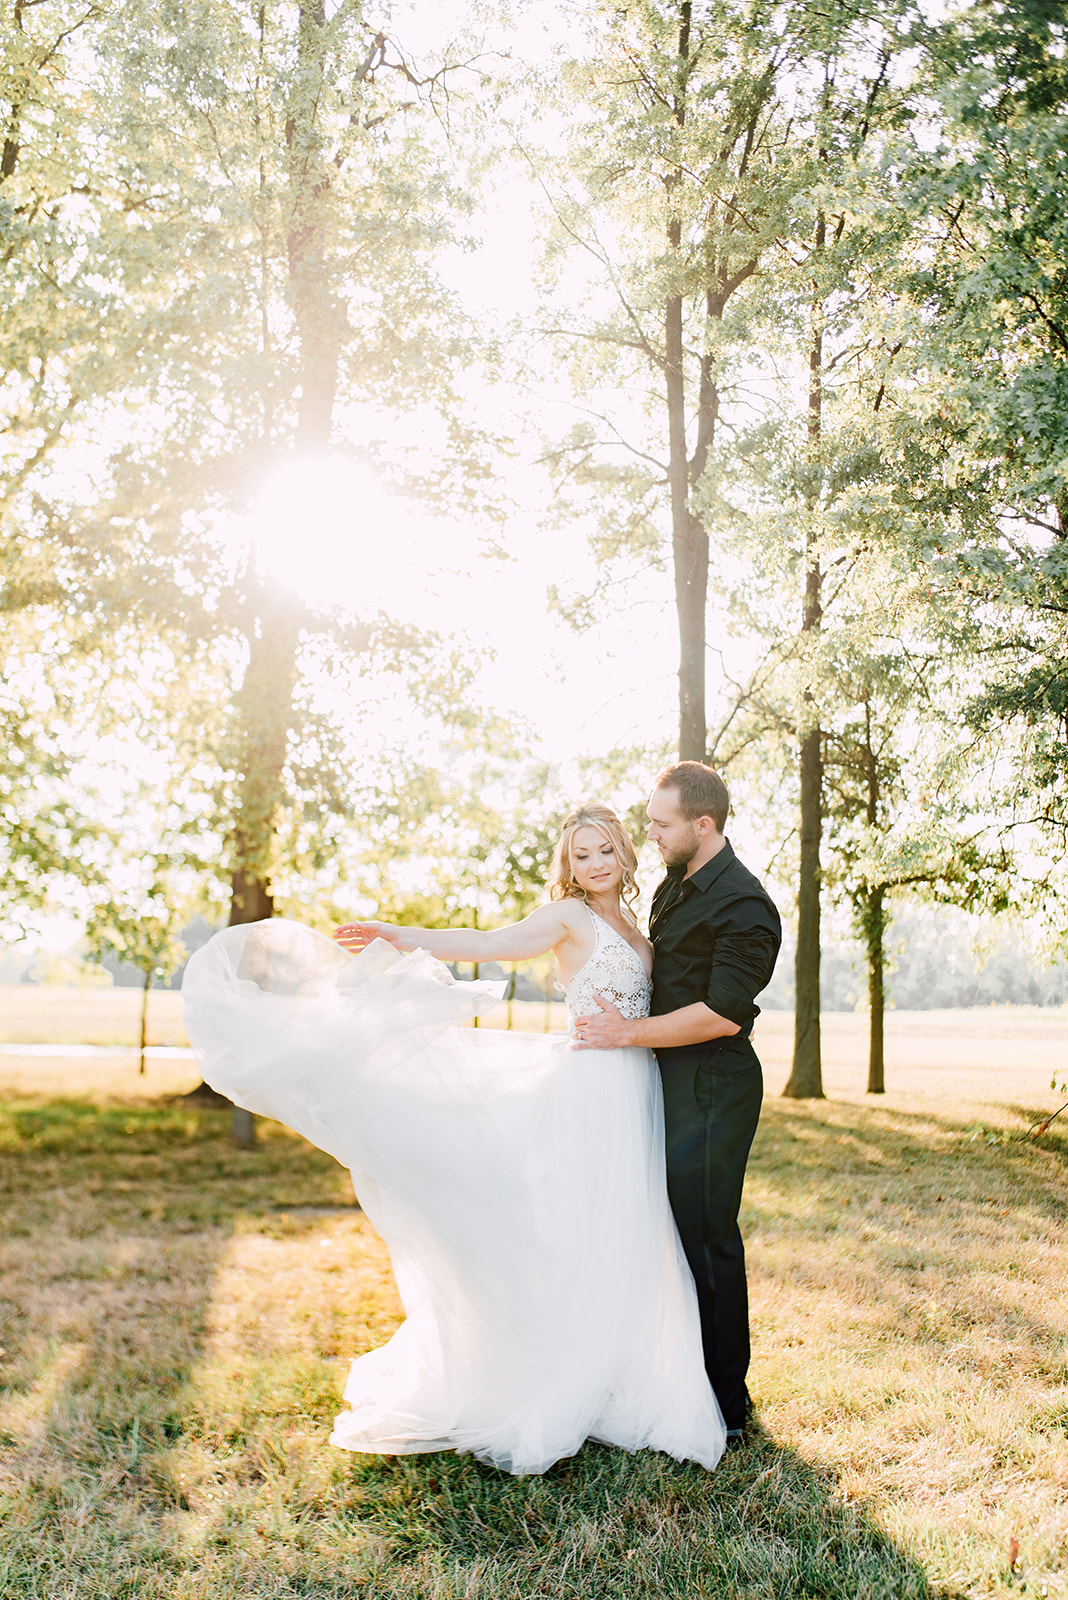 4 Year Anniversary - Sweet Williams Photography is a wedding and engagement photographer serving the Nashville, Tennessee area.